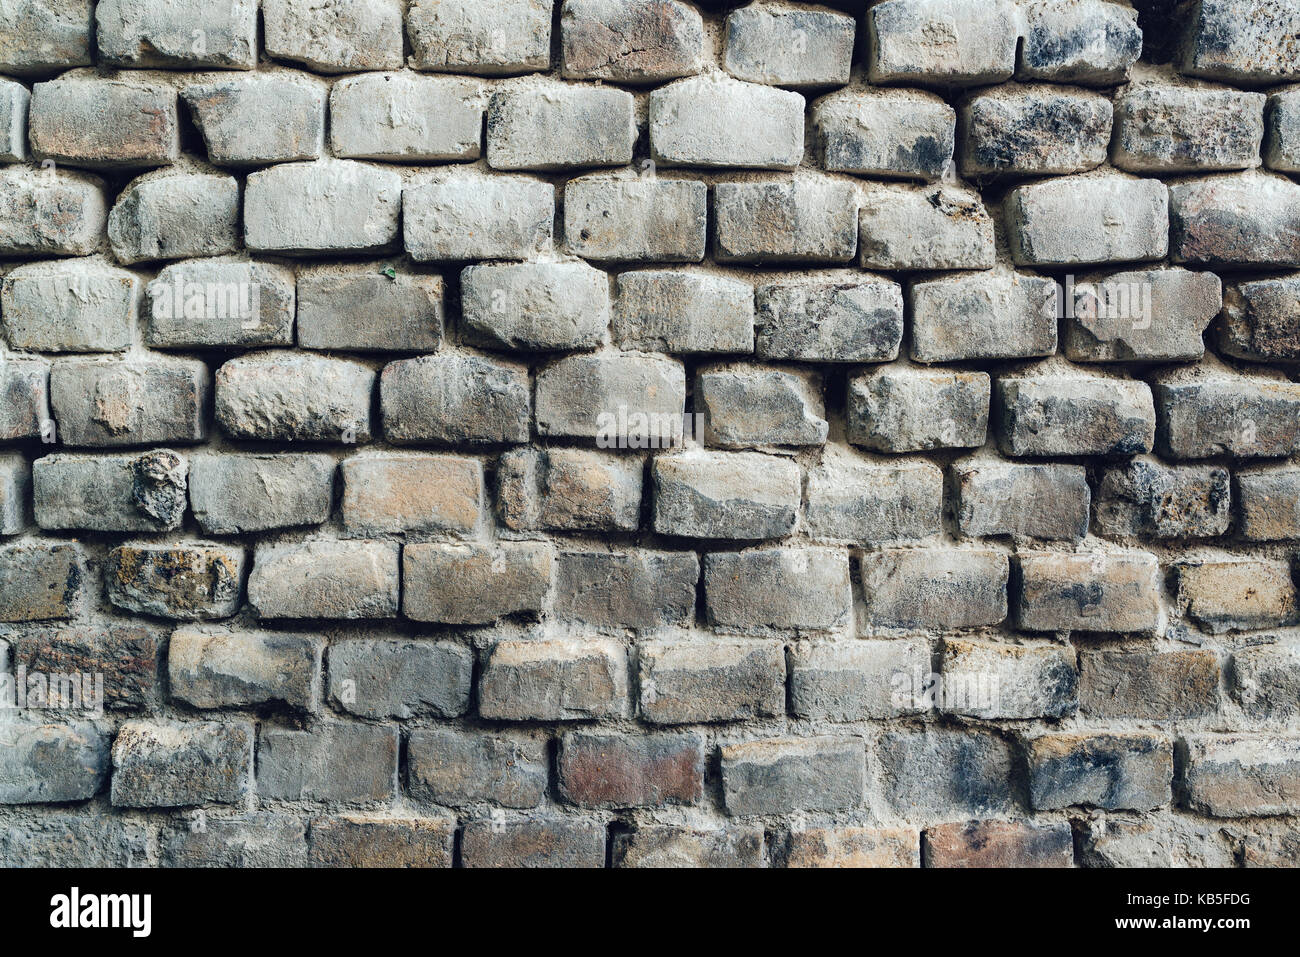 Rustic exterior brick wall surface as weather worn background Stock Photo